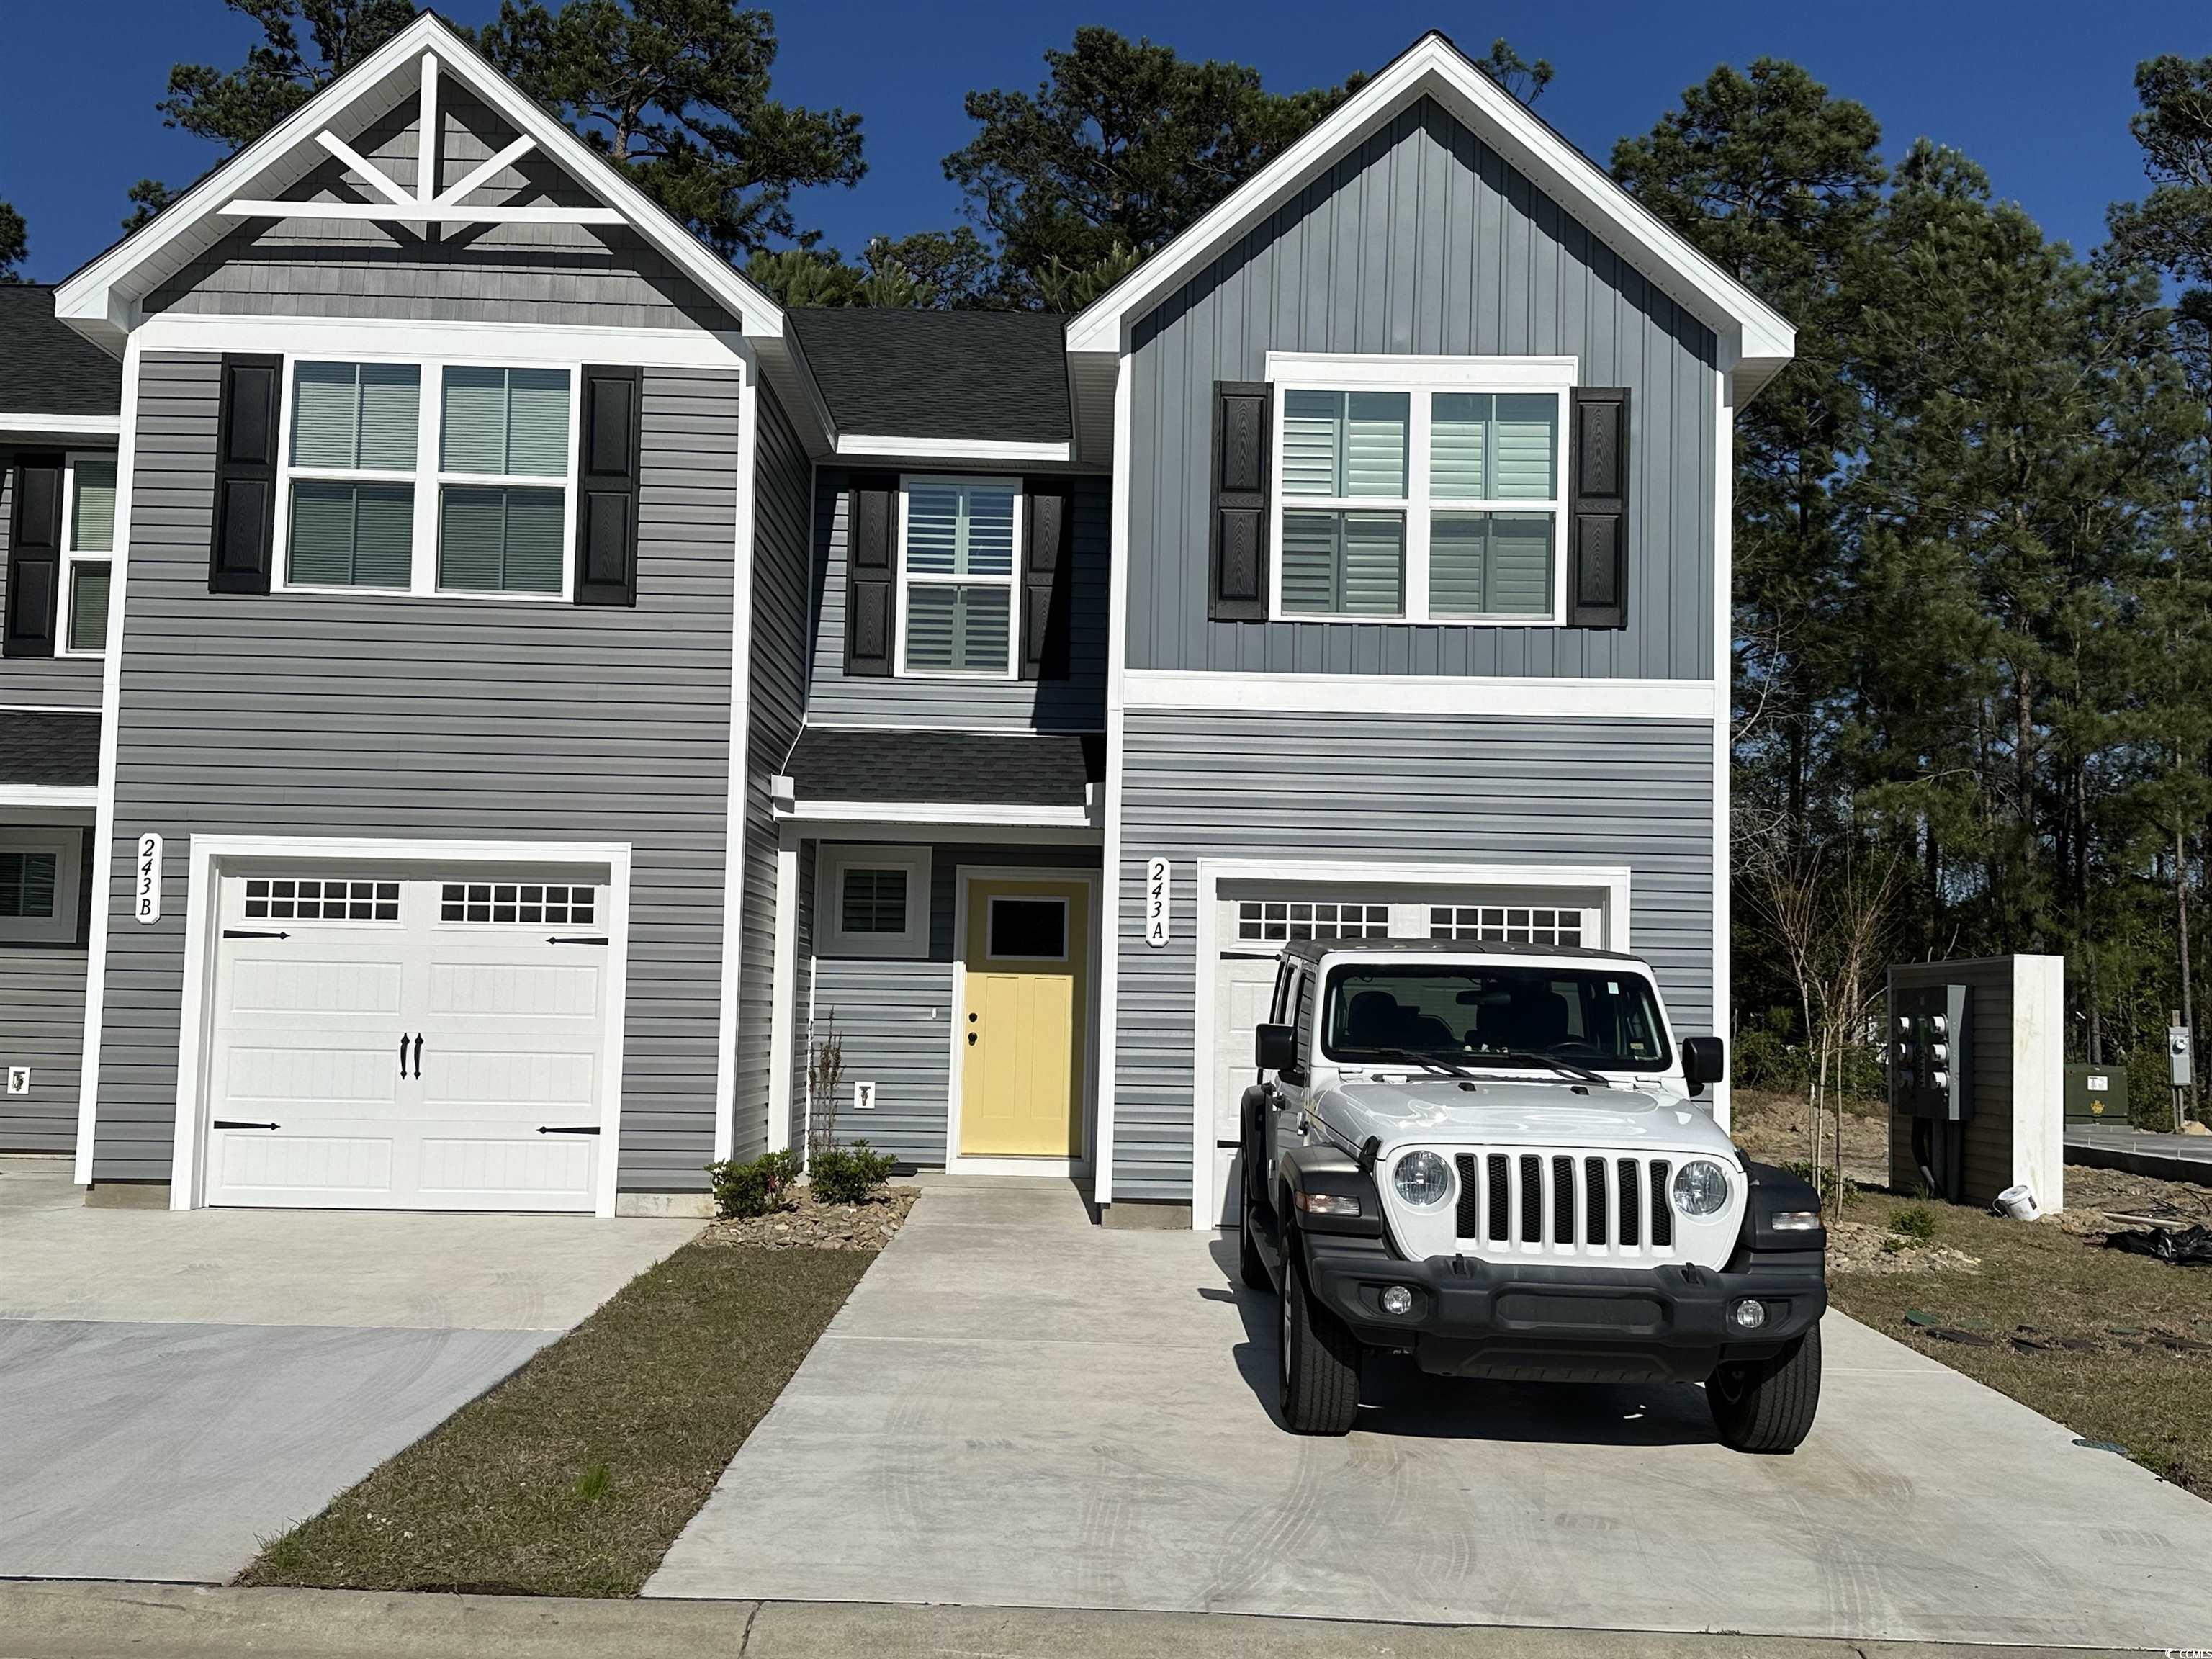 this newly opened end unit homesite with rear wooded views is now available!   at forestbrook townhomes you can own for the lowest price in myrtle beach - with easy access to major roads, highly-ranked carolina forest schools, and everyday conveniences.   these brand new 2-story townhomes  offer 3 bedrooms, 2.5 baths, and 1,442 sq ft. homes will include open-concept living areas, modern design finishes, and a 1-car garage with 2 car private driveway. if you’re currently renting in the area, you know how hard it is to find a new home and one that doesn’t cost a fortune!  these affordable homes even come with all appliances included (yes, the washer and dryer too), saving you money when you move. you even get to keep your low-maintenance lifestyle because all exterior maintenance is taken care of for you.  forestbrook townhomes is close to all the routes you need! easily jump on 544 to run a quick errand or catch 17 to head down to murrells inlet or up to north myrtle beach. highly ranked carolina forest schools are also minutes from home.  the best part is it is all yours! no more worrying about rising rent costs or negotiating with your landlord. you can do it – and our team is here to help you every step of the way.